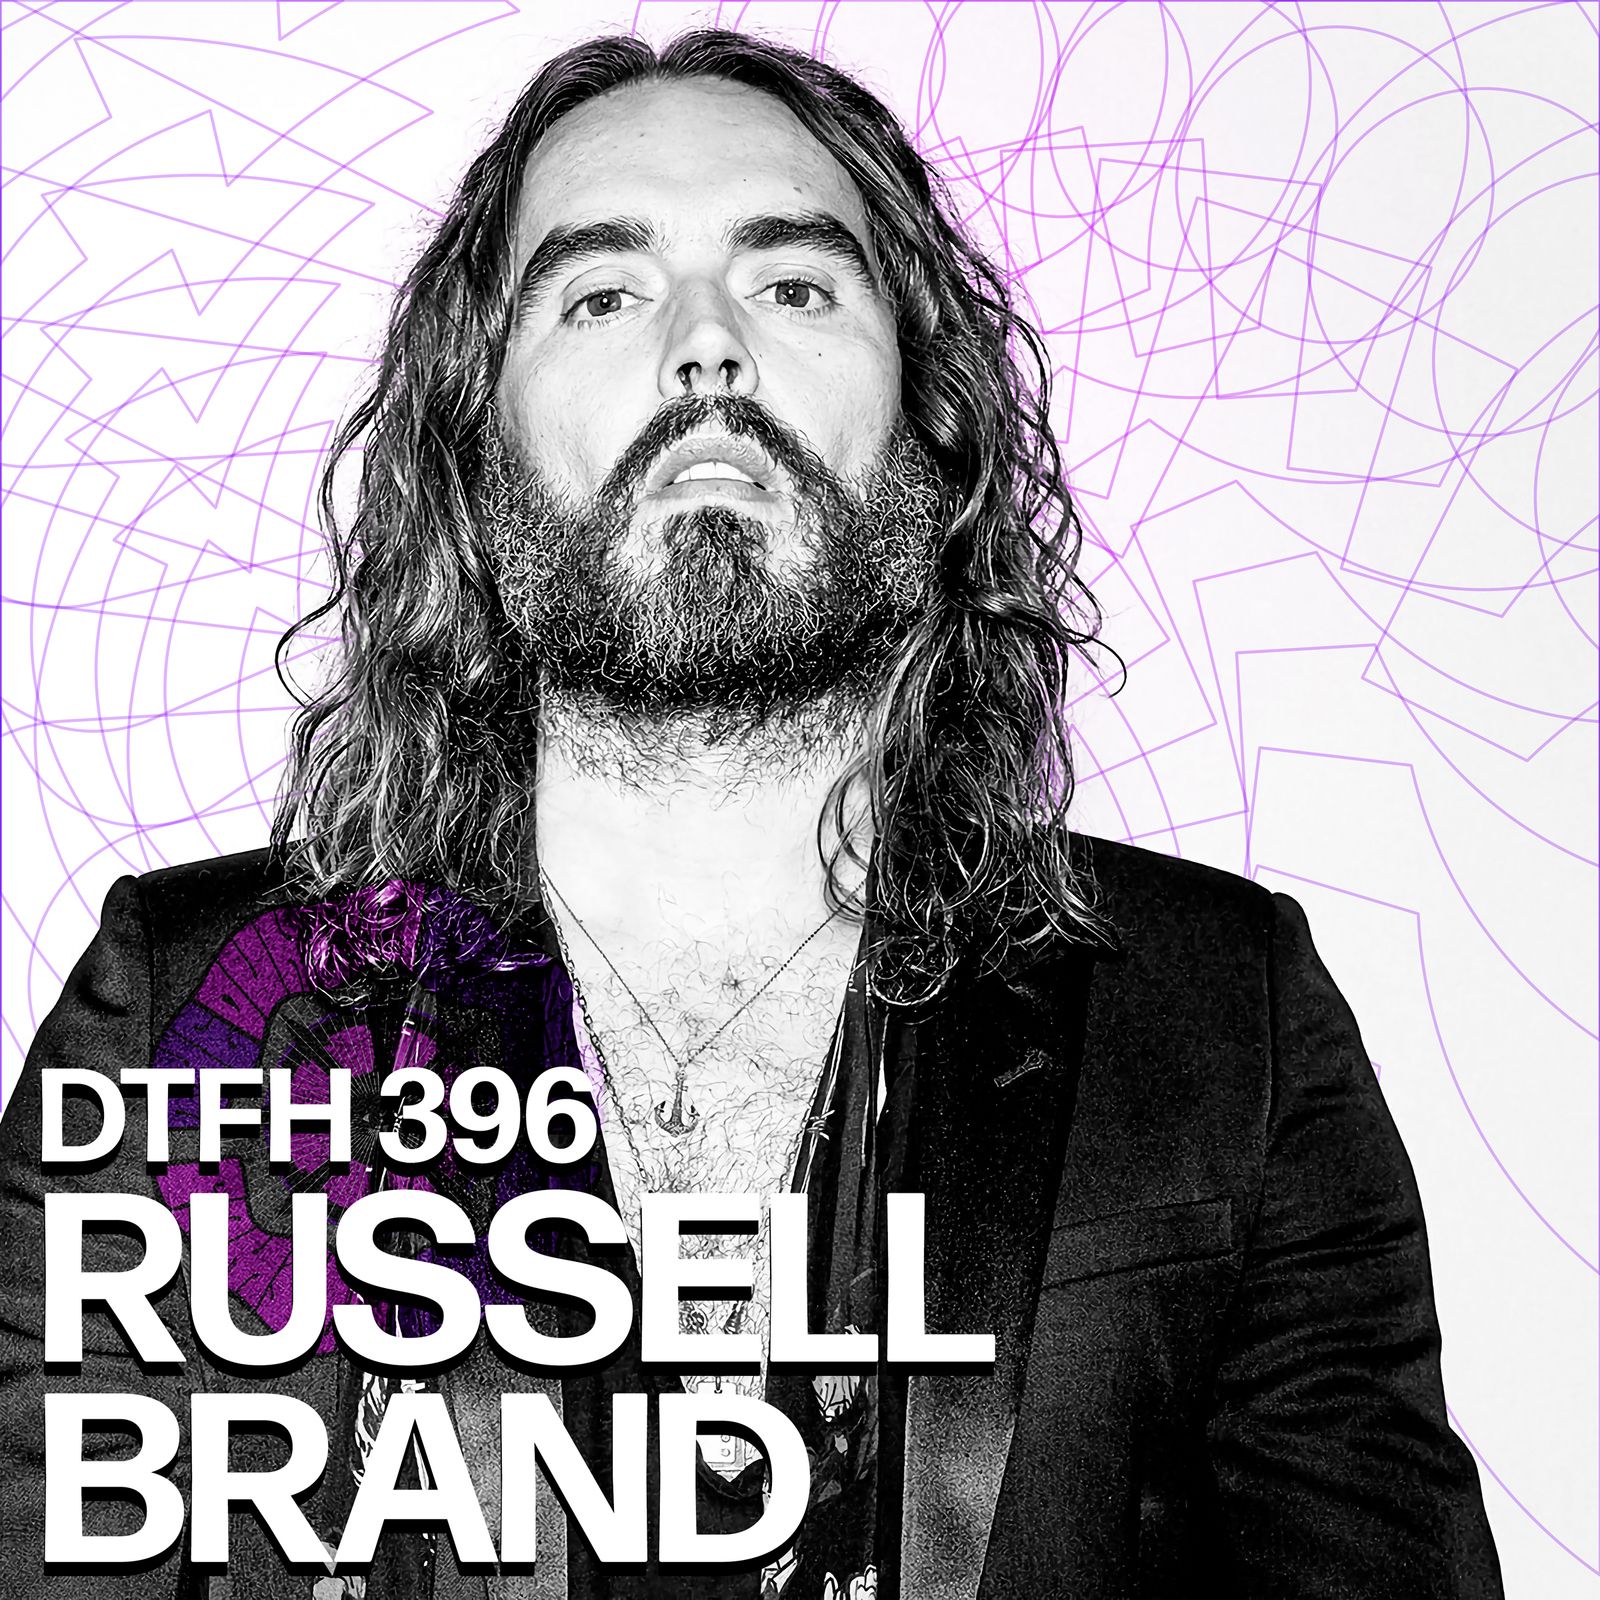 Russell Brand on fame, celebrity and dropping it all to become a spiritual teacher